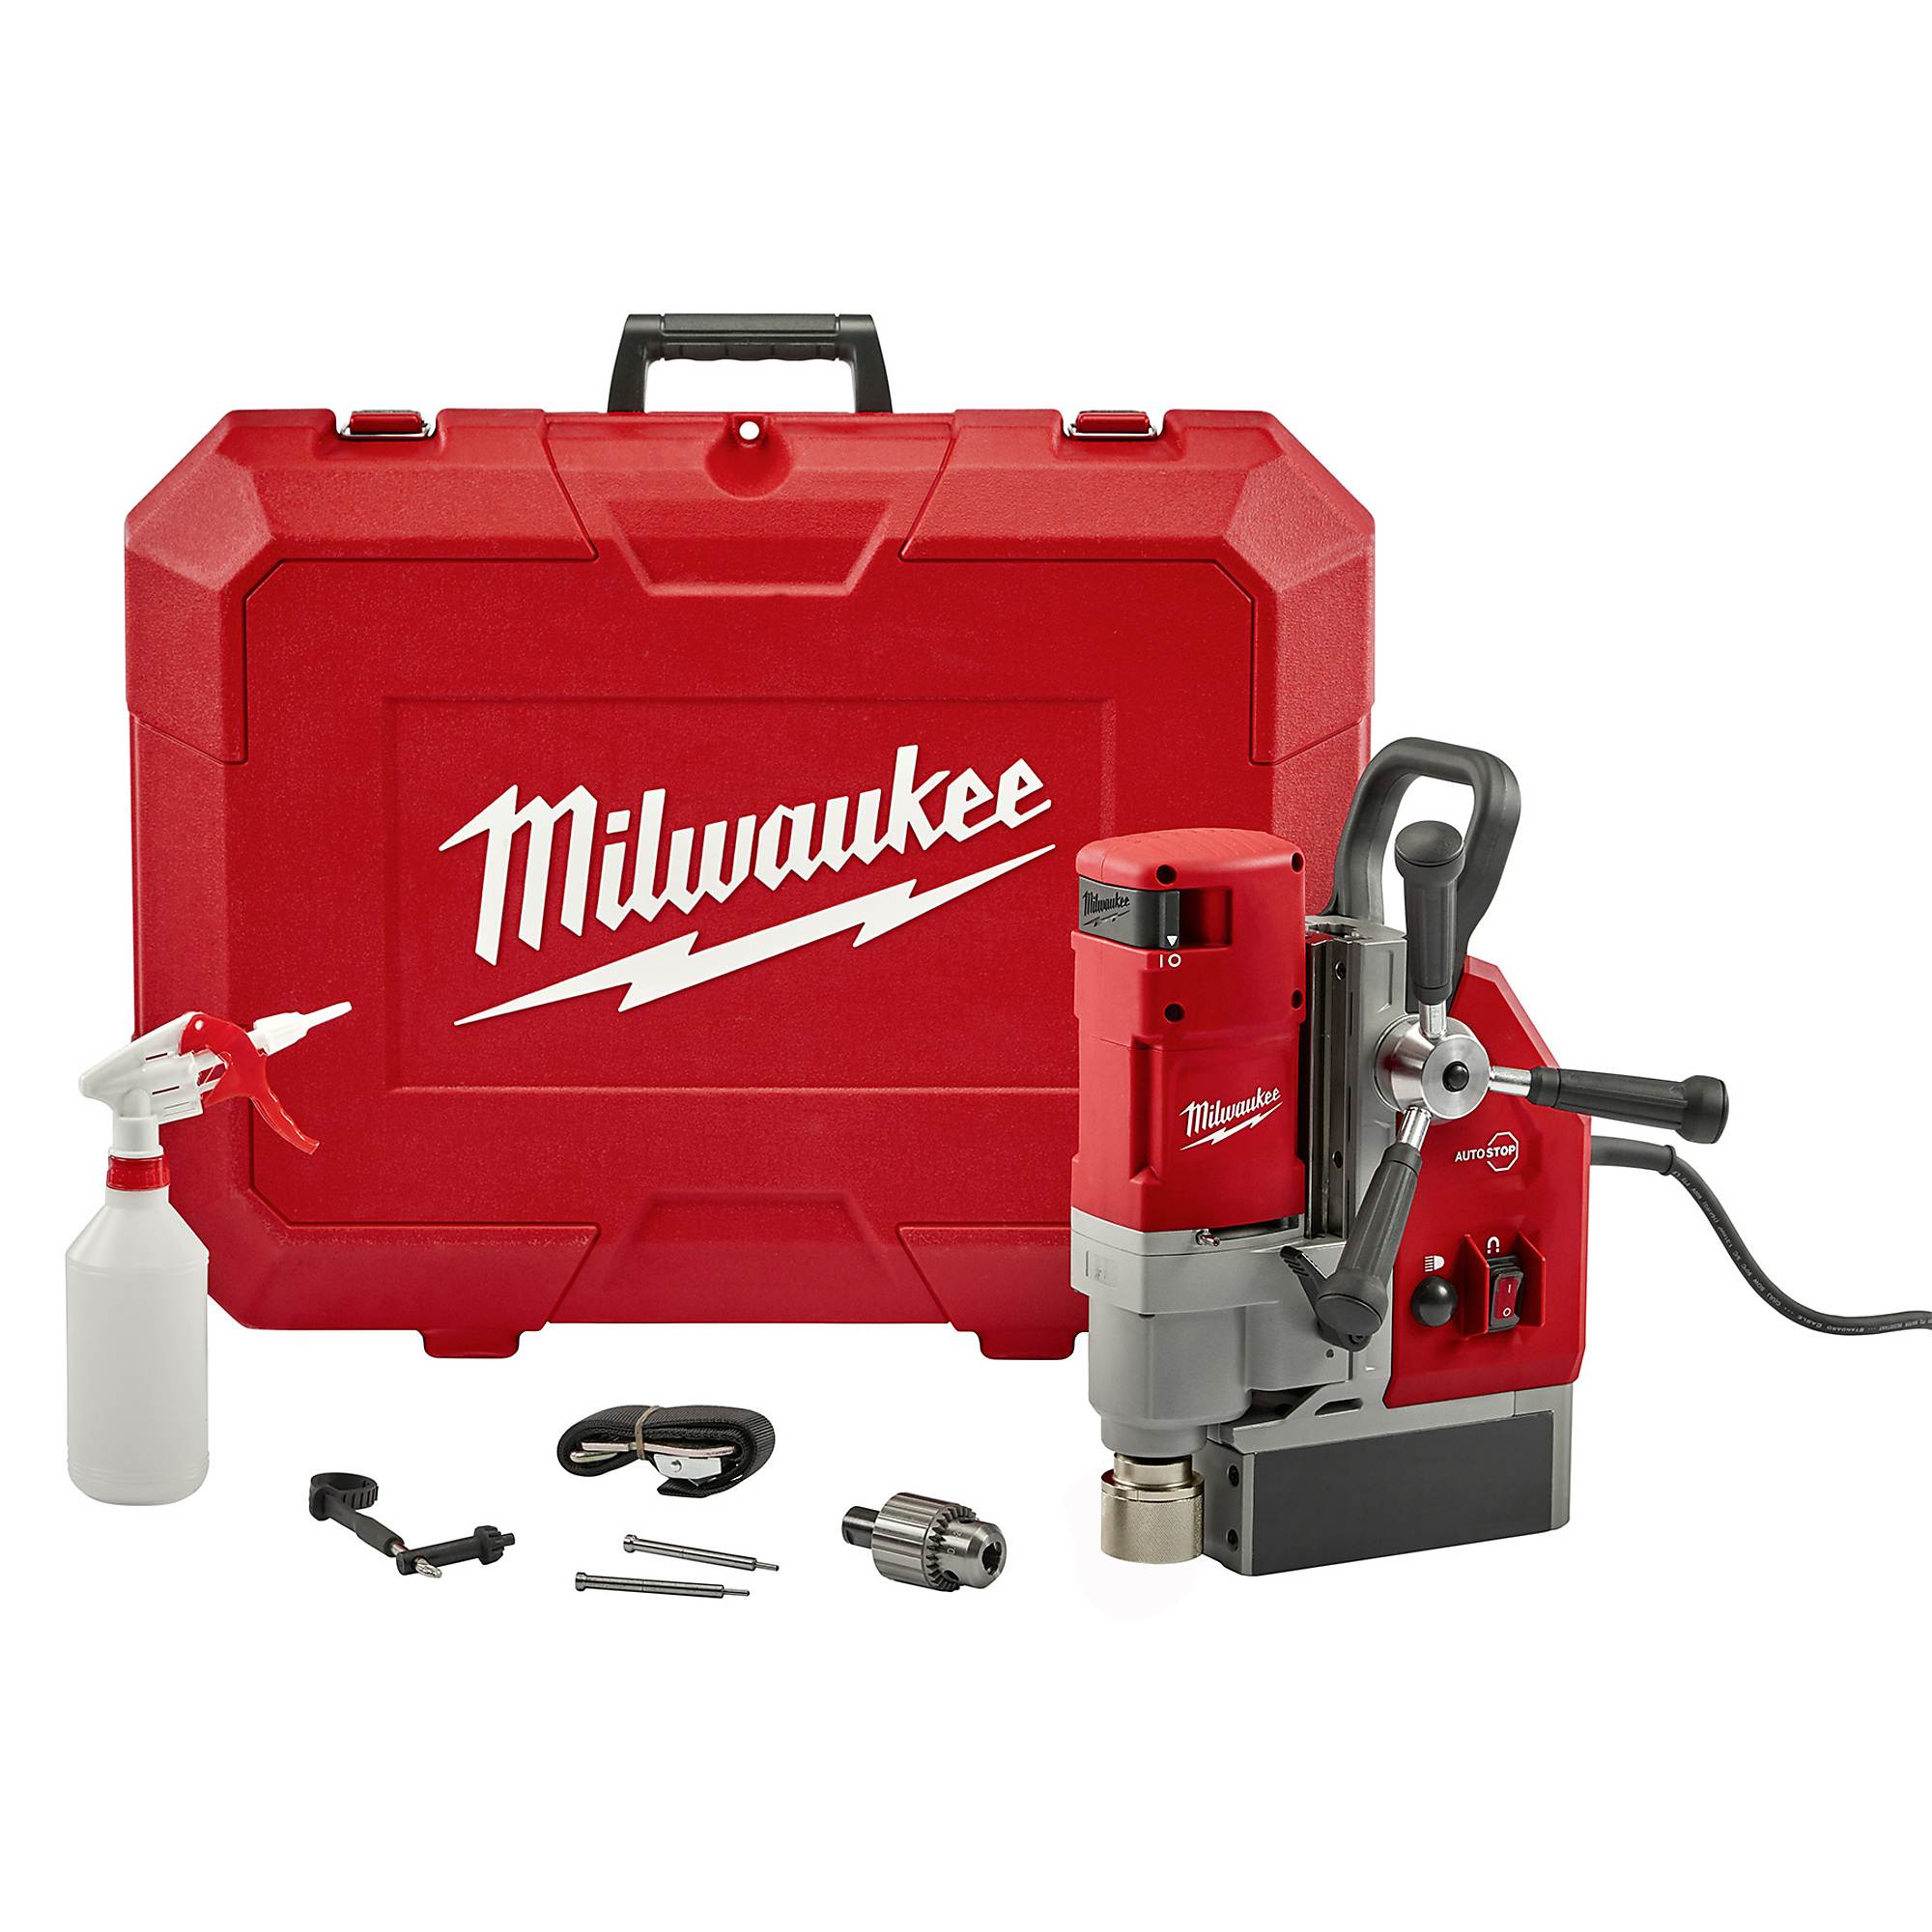 Milwaukee Compact Electromagnetic Drill Press, 1 5/8Inch Drill Capacity, 13 Amp, 2.3 HP, Model 4272-21